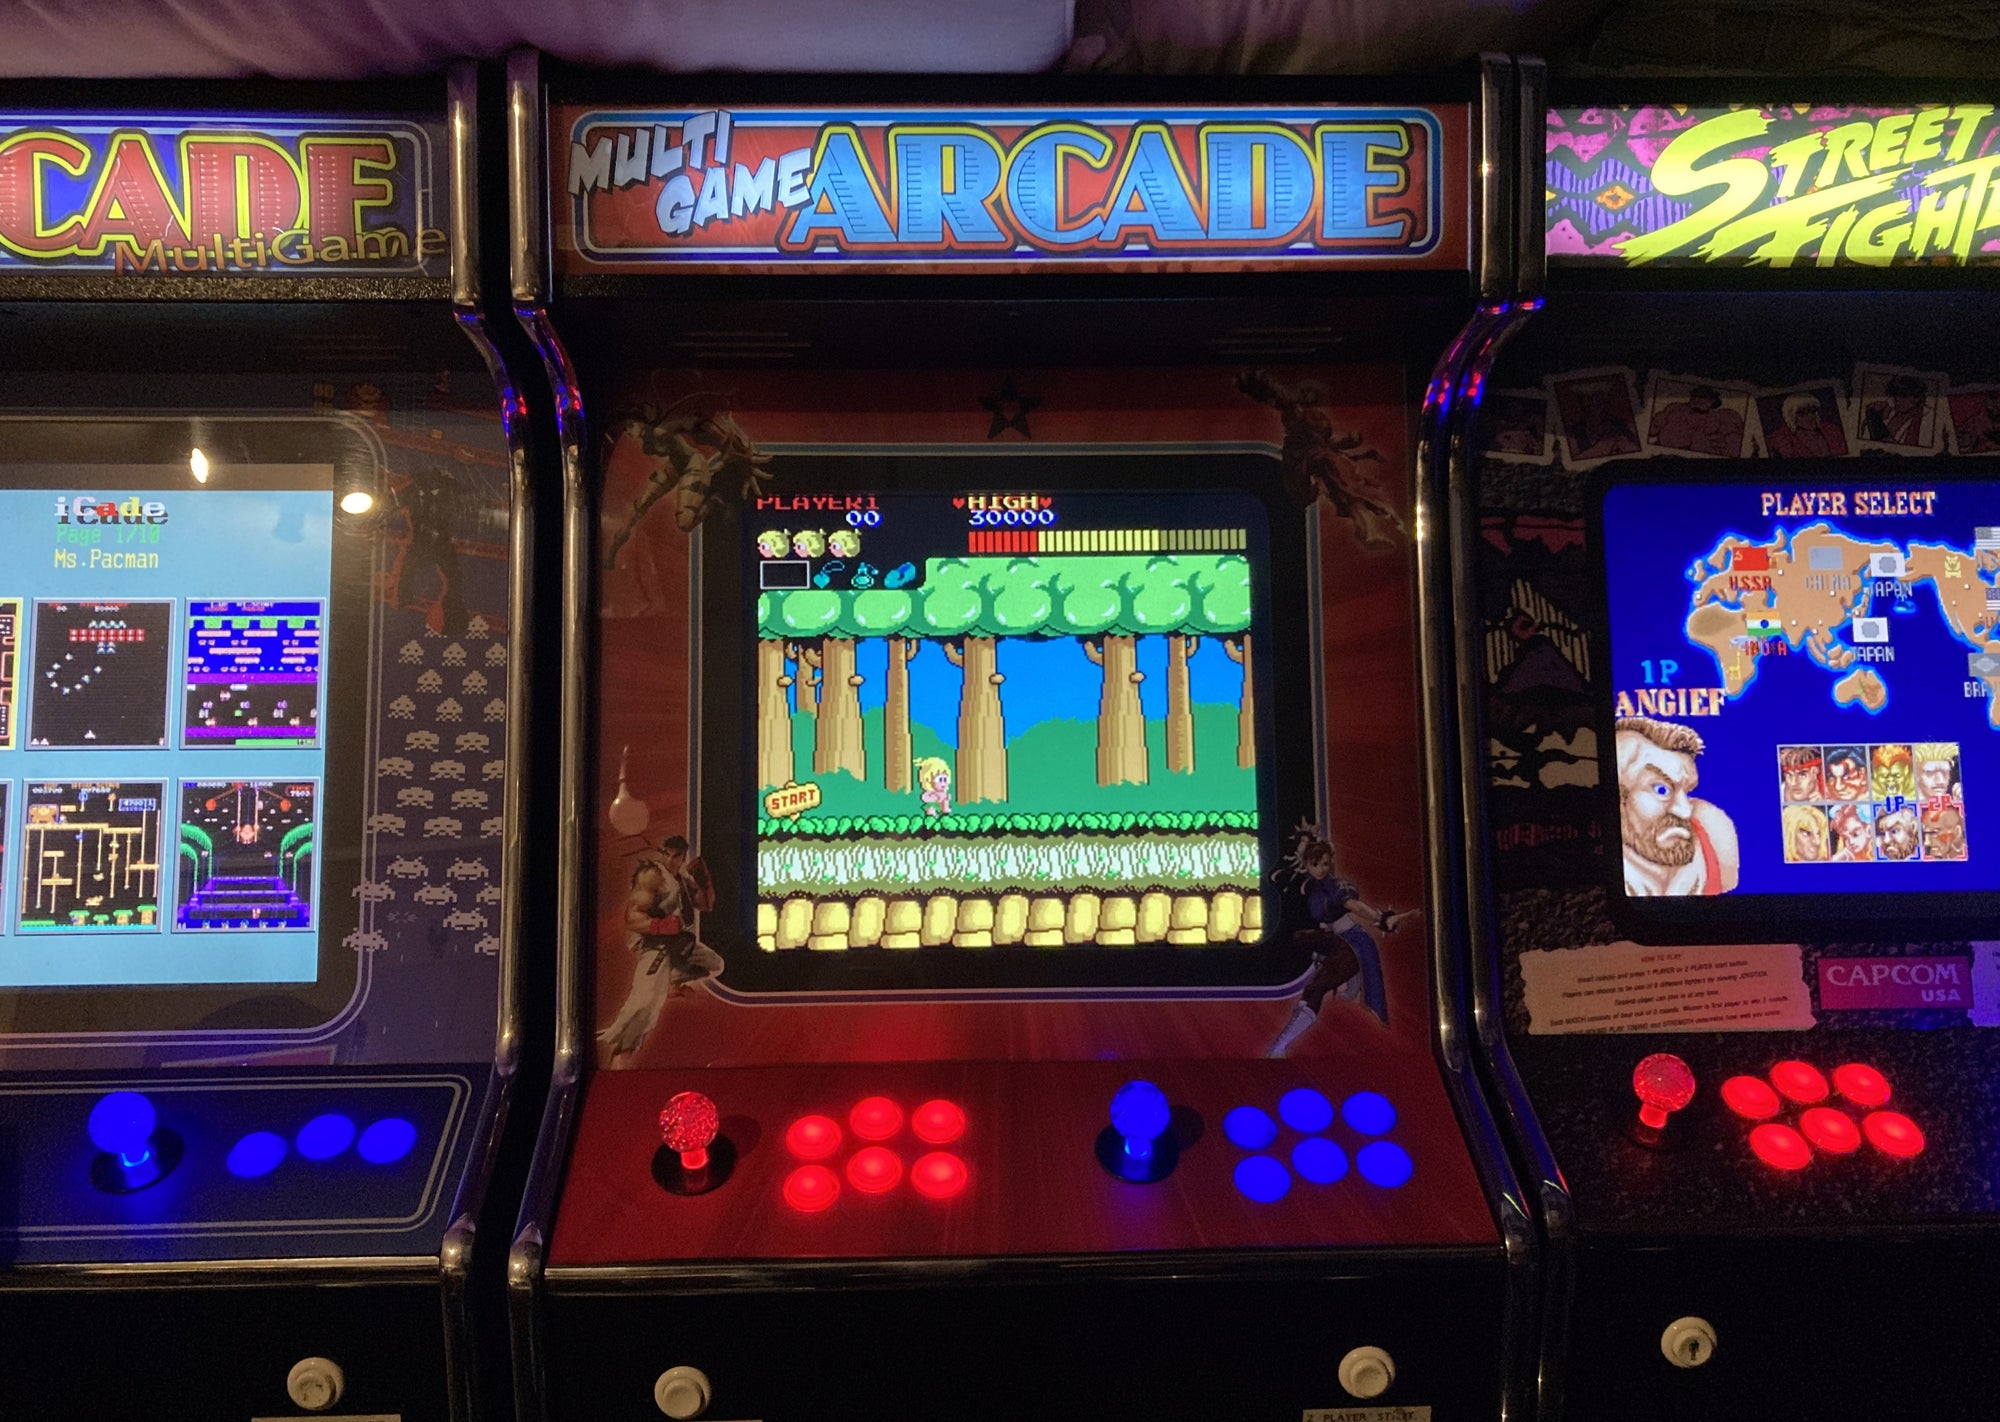 Street Fighter Arcade Game for Hire